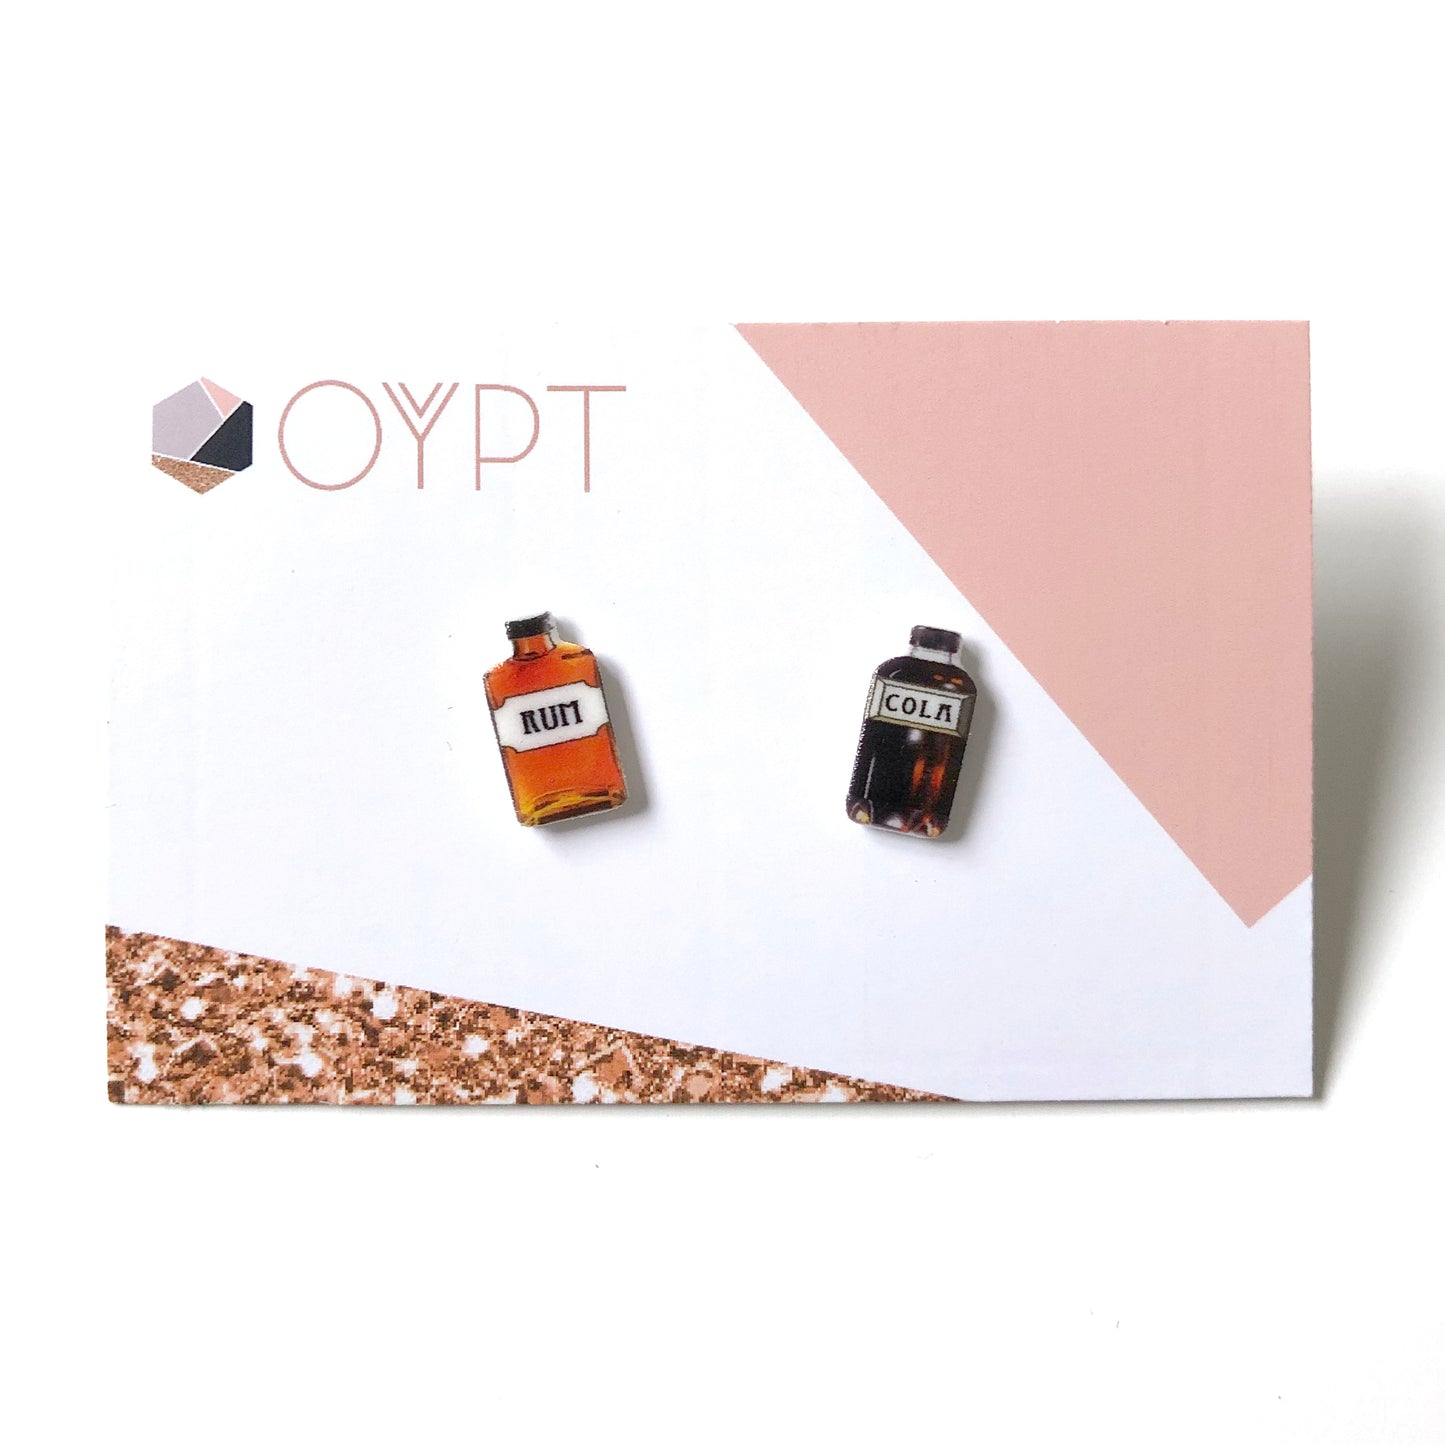 Rum and cola bottle stud earrings - Quirky gift for friends